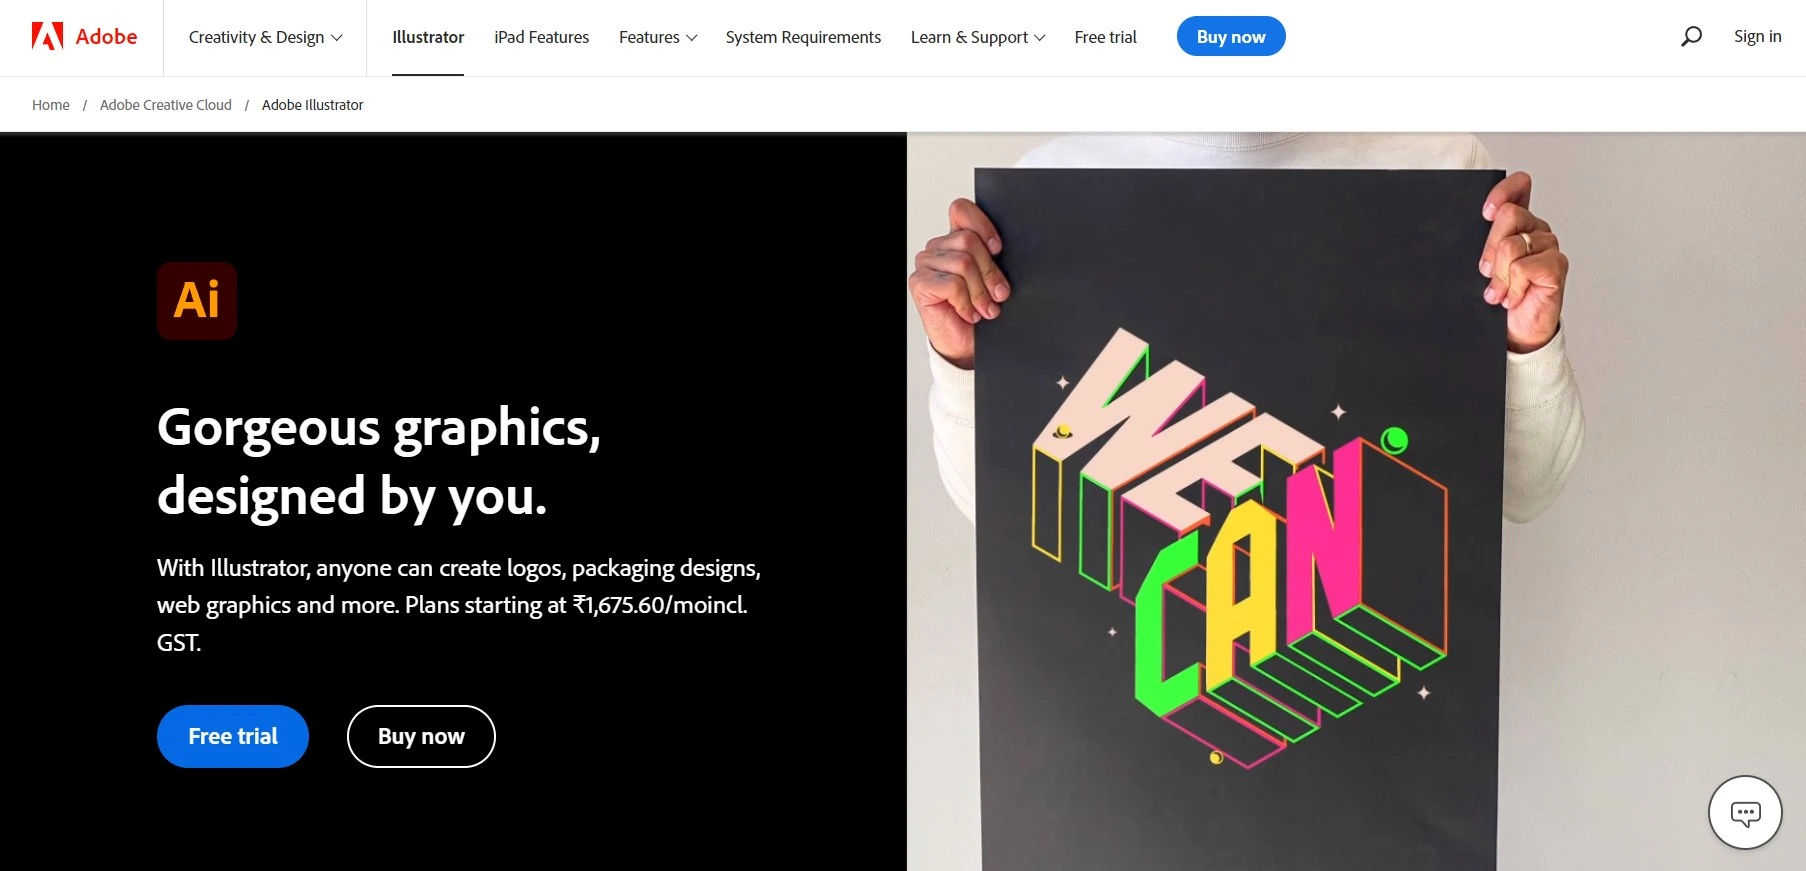 Illustrator helps you design gorgeous graphic designs